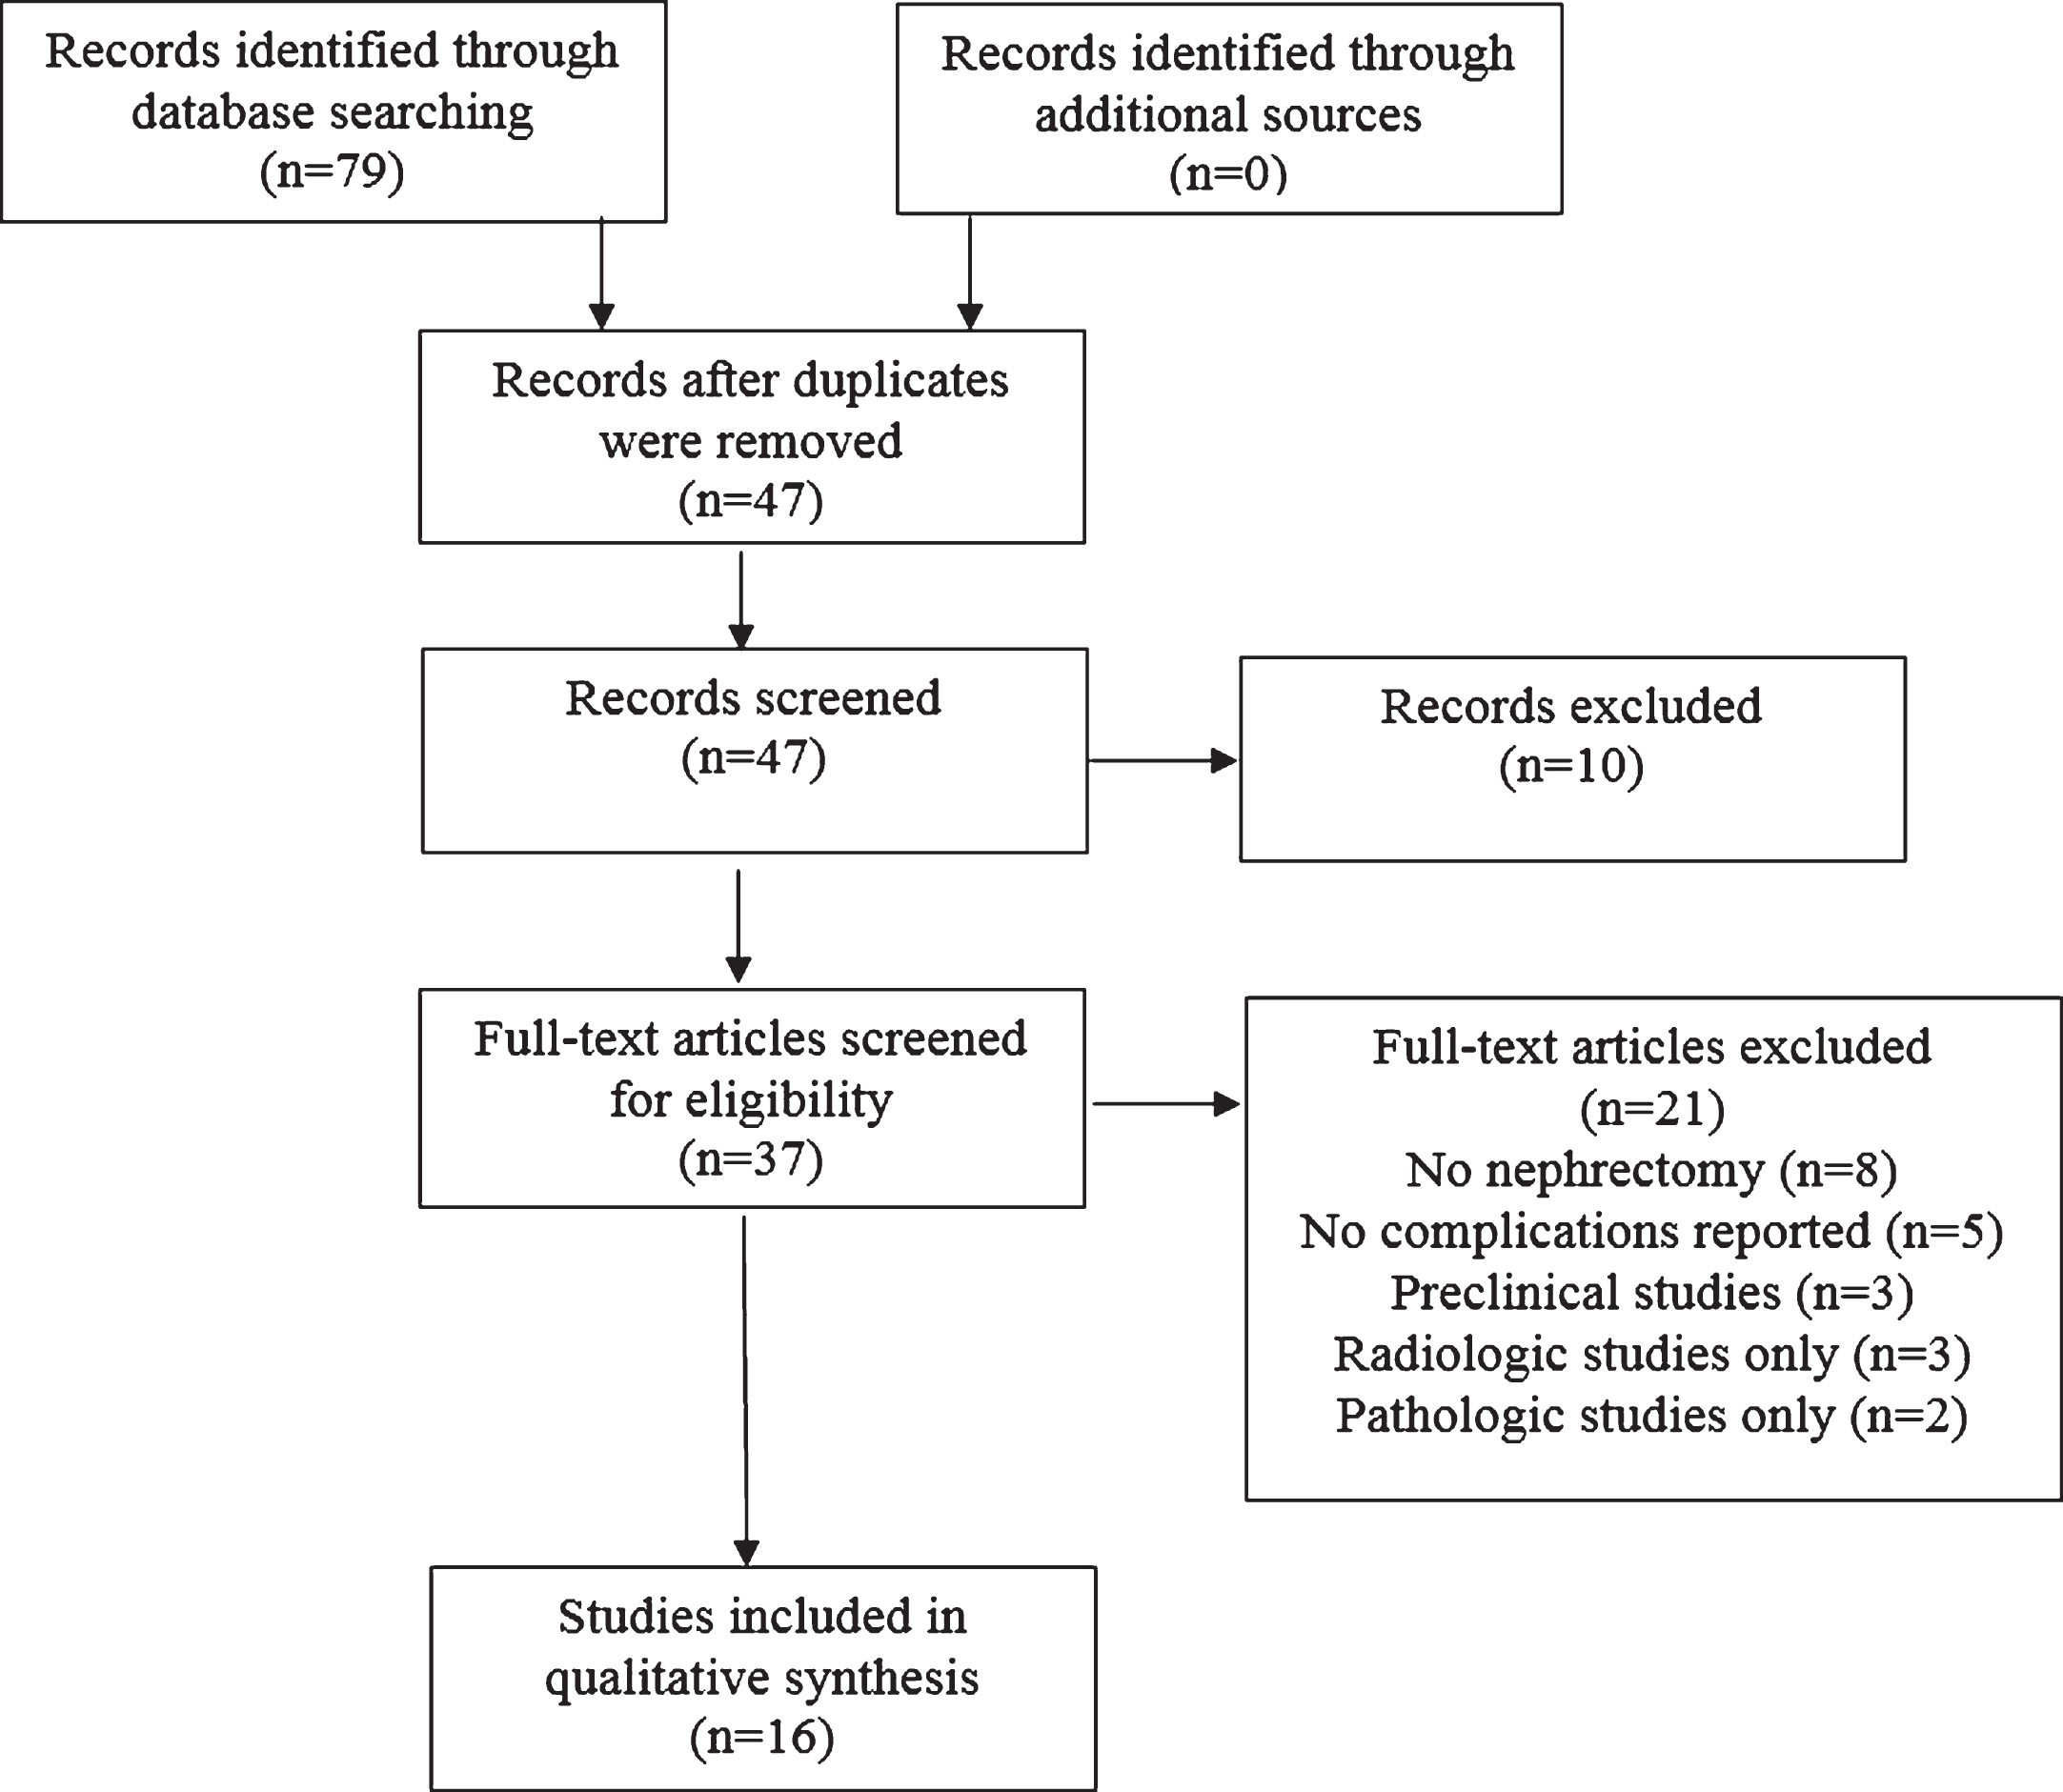 Flow diagram for litrature search and screening for eligible studies included in the systematic review.